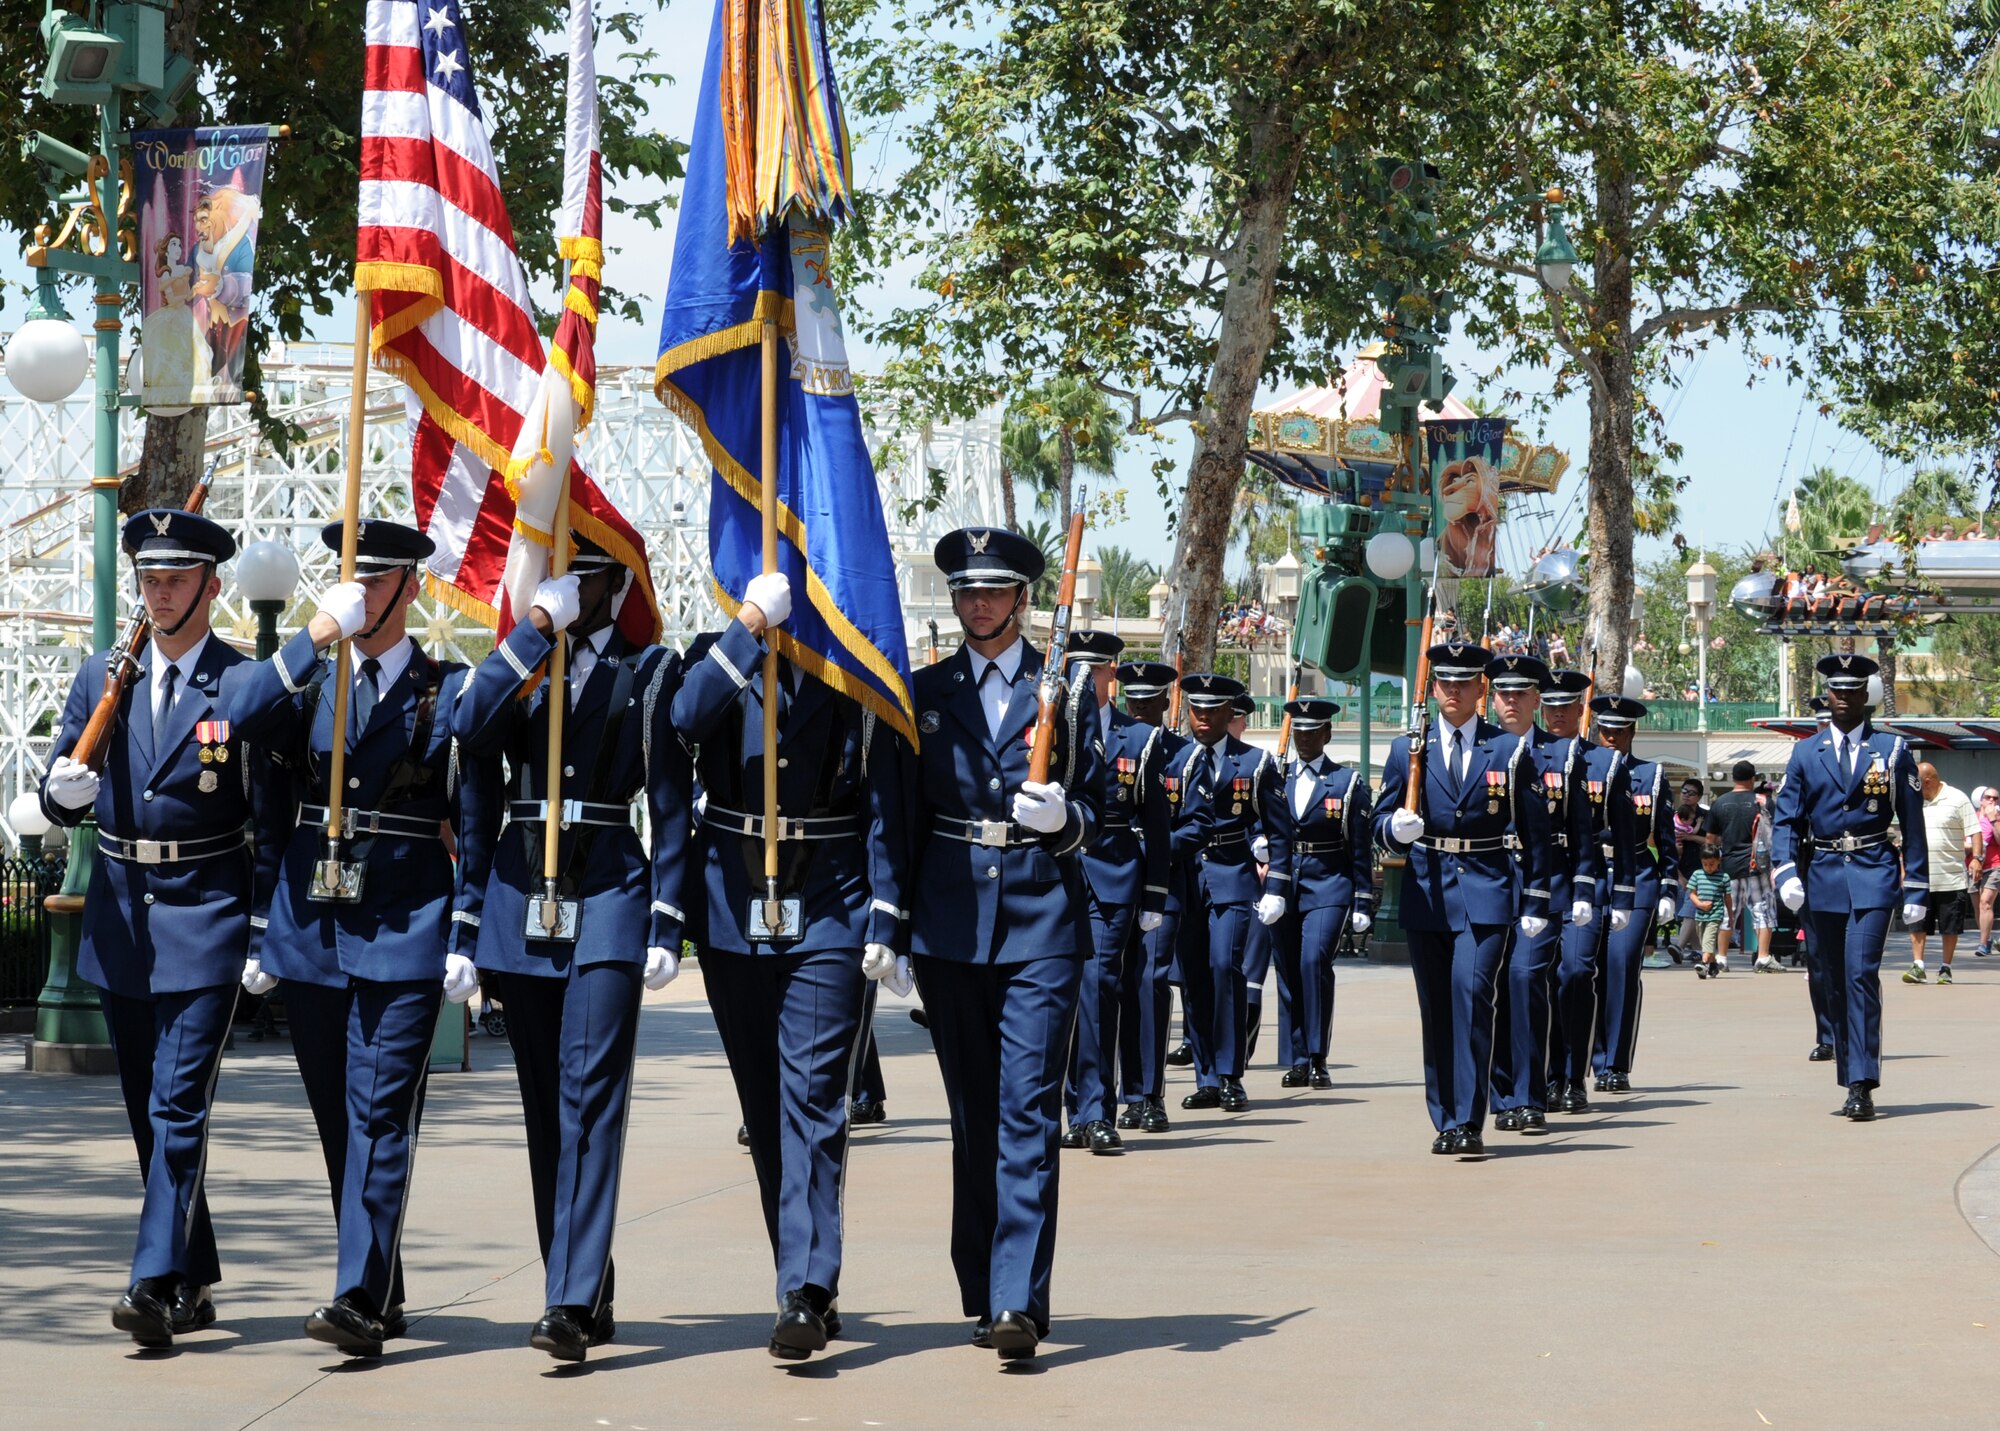 The United States Air Force Honor Guard participates in a parade at Disneyland in Anaheim, Calif., July 2, 2015. Forty-five guardsmen traveled to Disneyland to participate in the park's “Celebrate America,” Fourth of July performances. (U.S. Air Force photo/Staff Sgt. Nichelle Anderson)